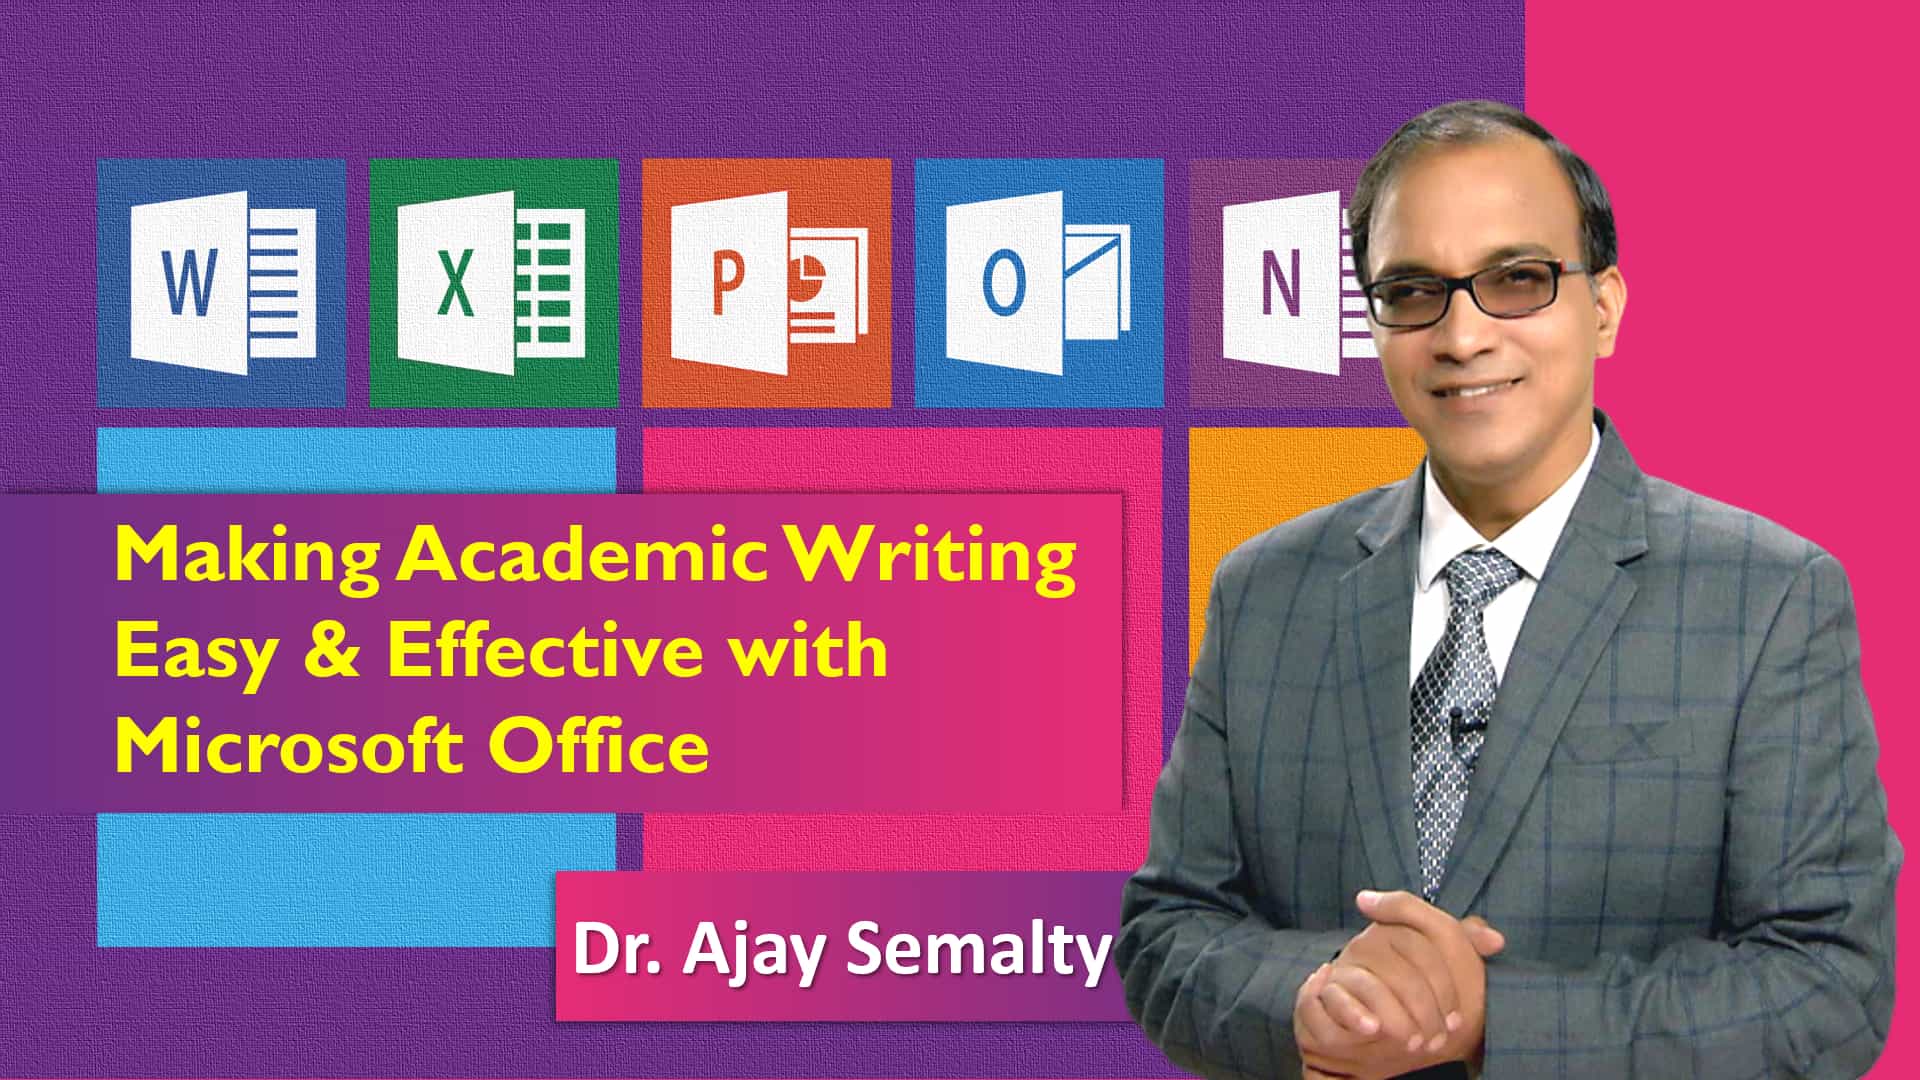 Microsoft Office Tools for Making Academic Writing Easy and Effective